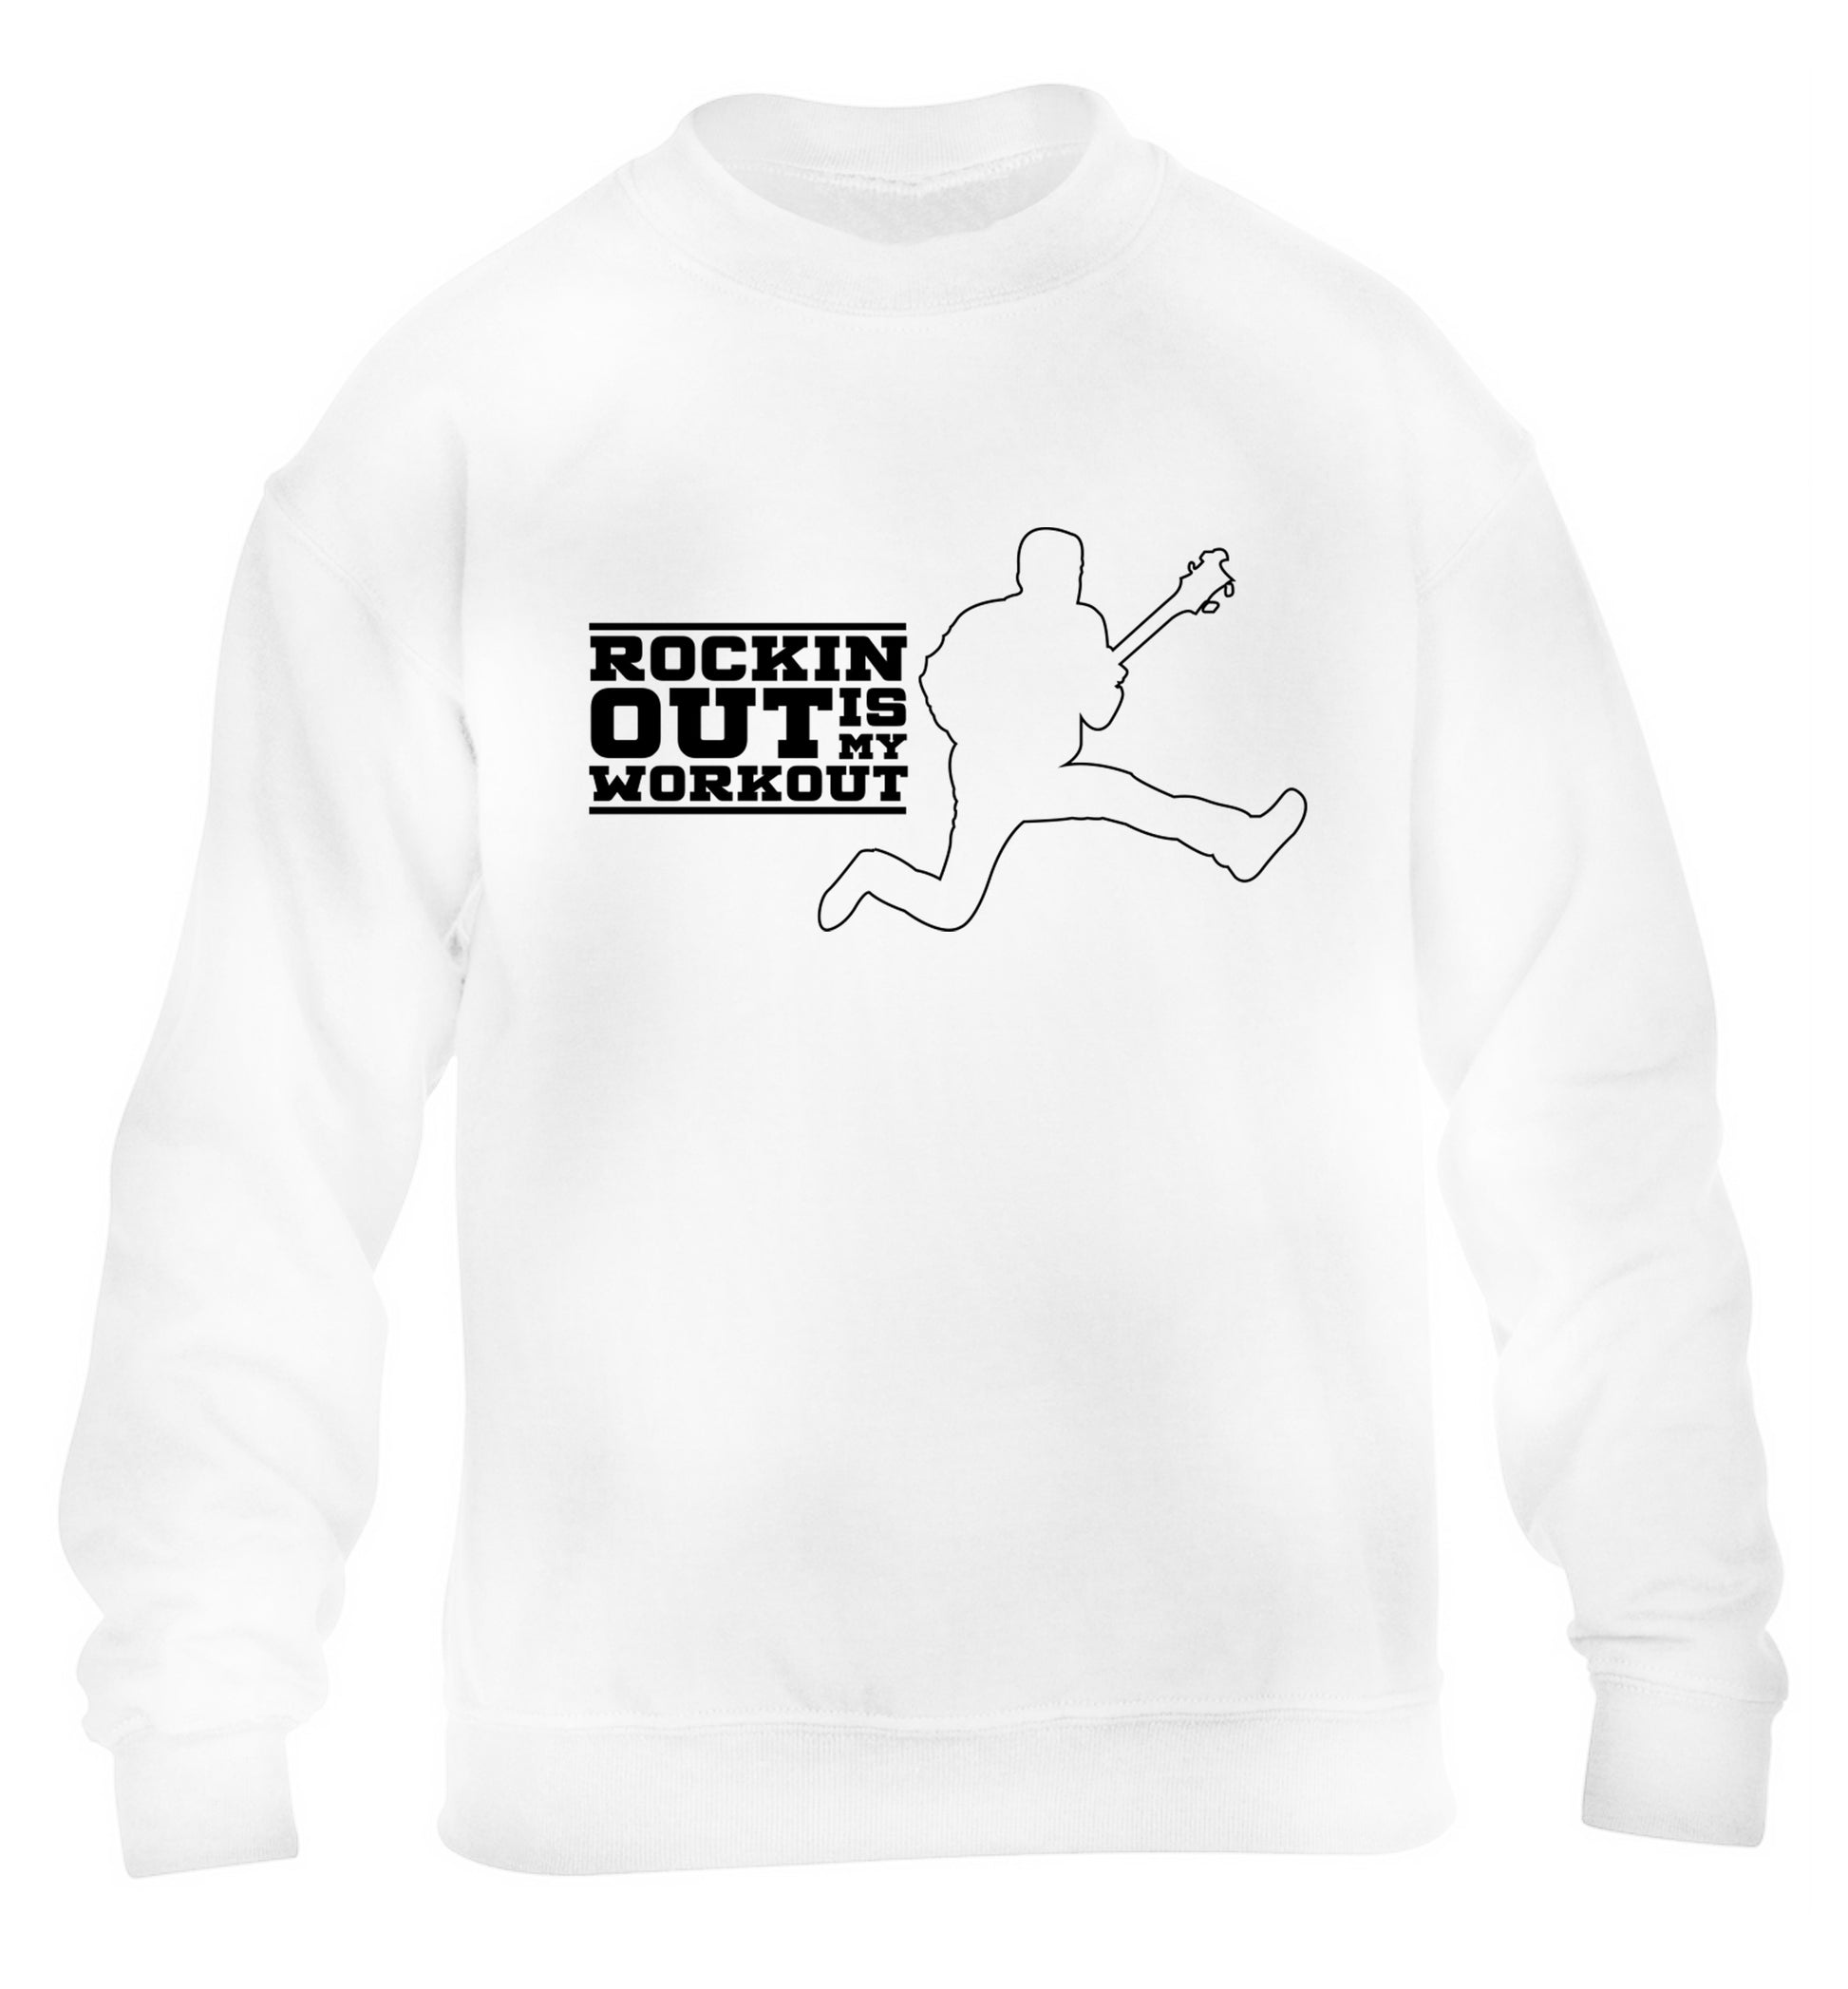 Rockin out is my workout children's white sweater 12-13 Years